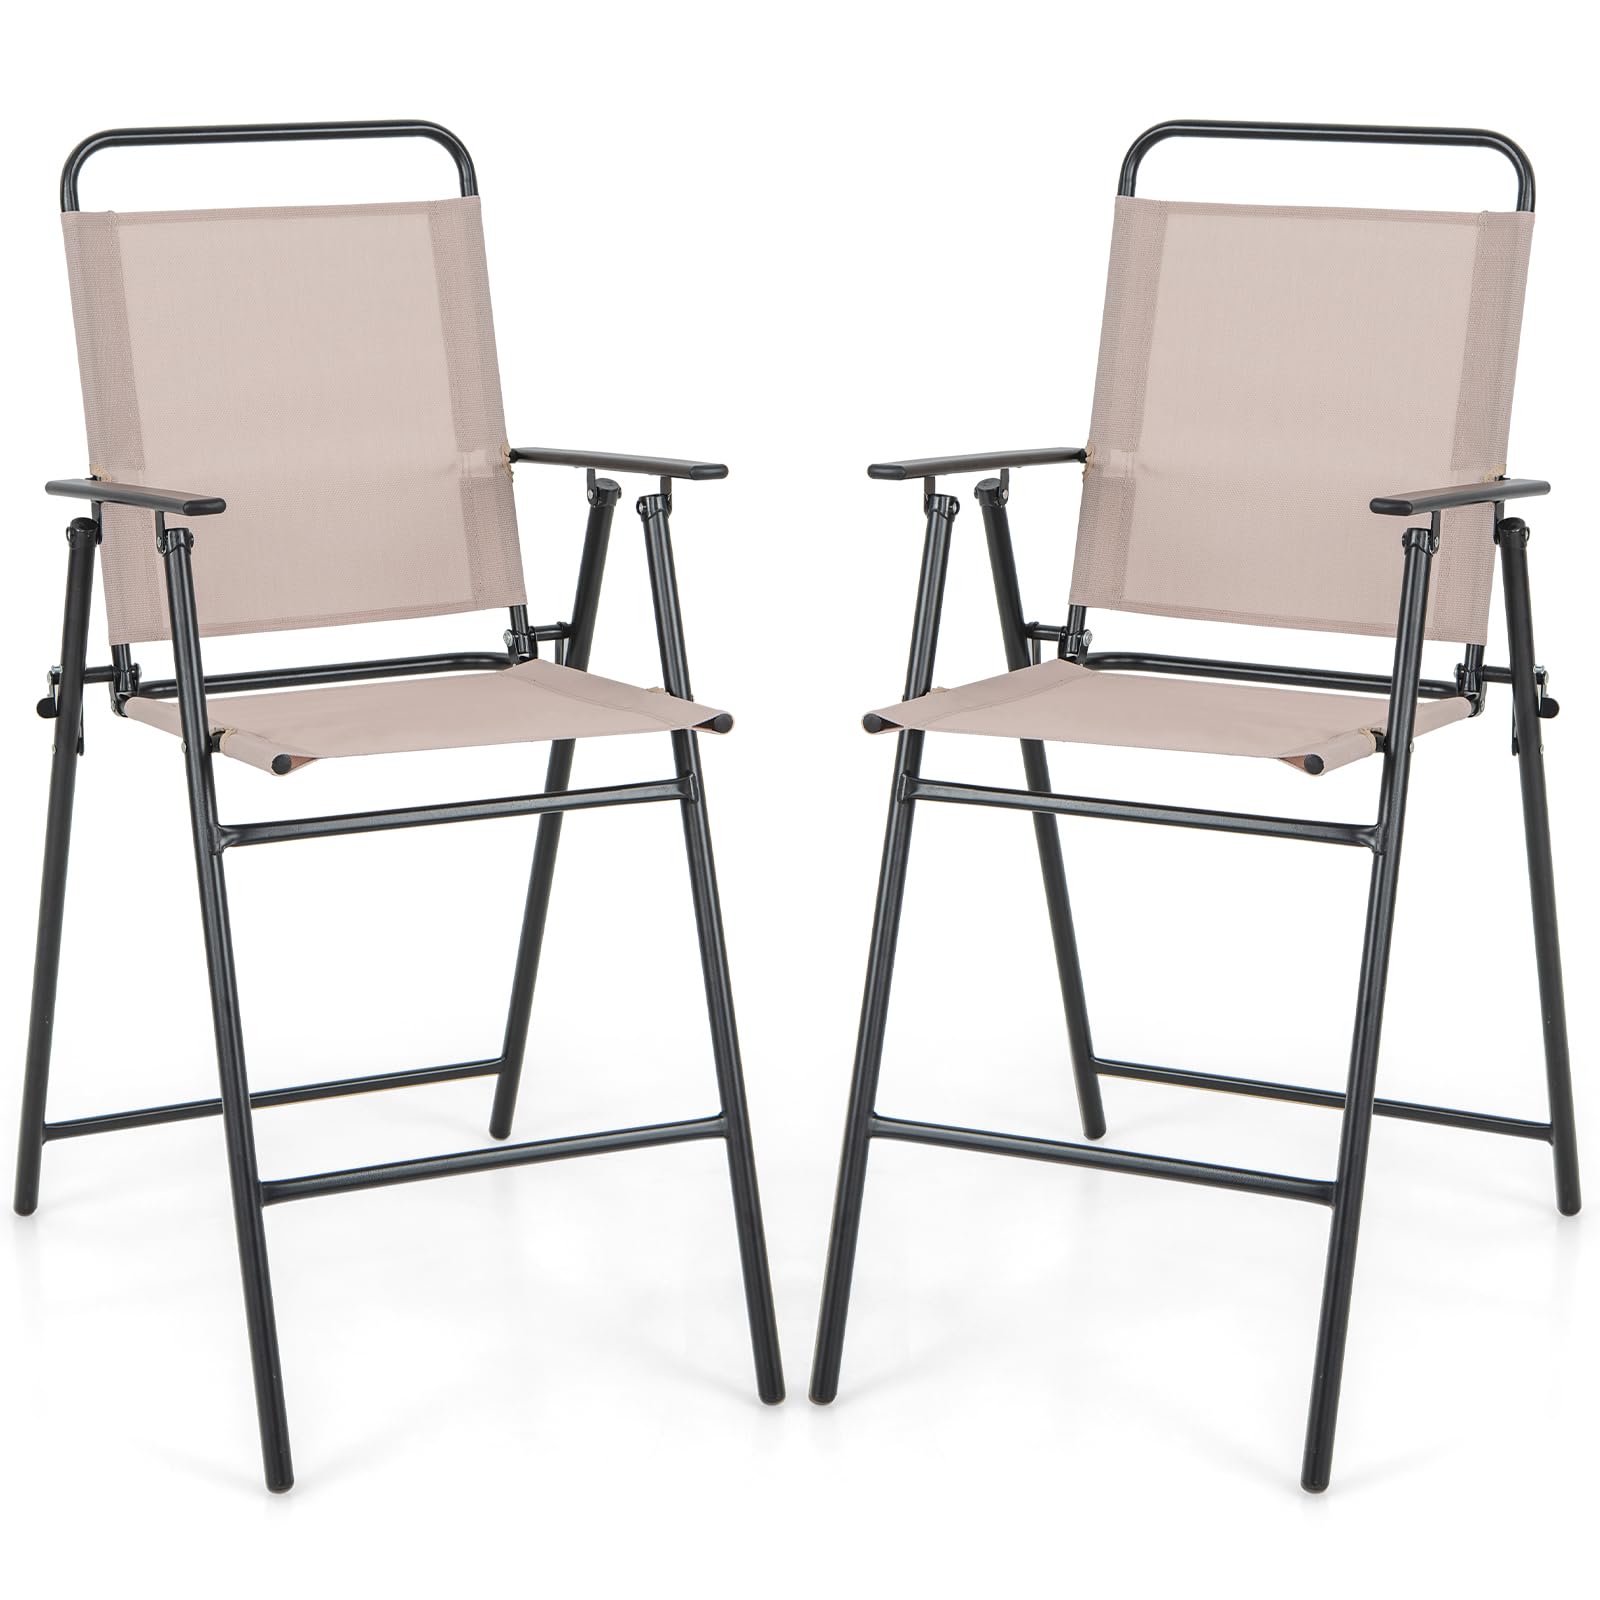 Giantex Outdoor Folding Bar Chair Set of 2, Bar-Height Patio Chairs with Backrest, Armrests, Footrest